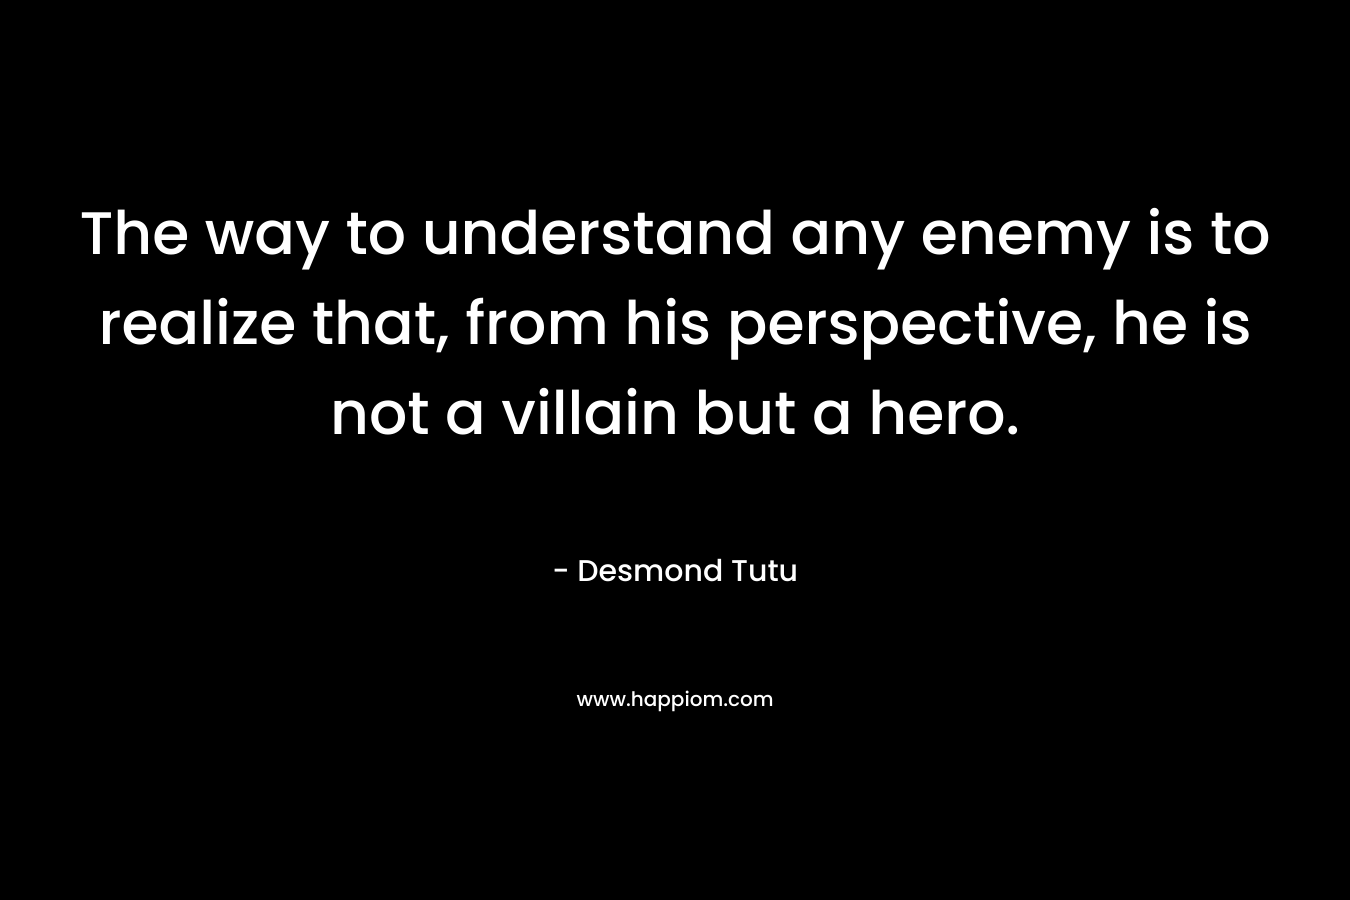 The way to understand any enemy is to realize that, from his perspective, he is not a villain but a hero. – Desmond Tutu